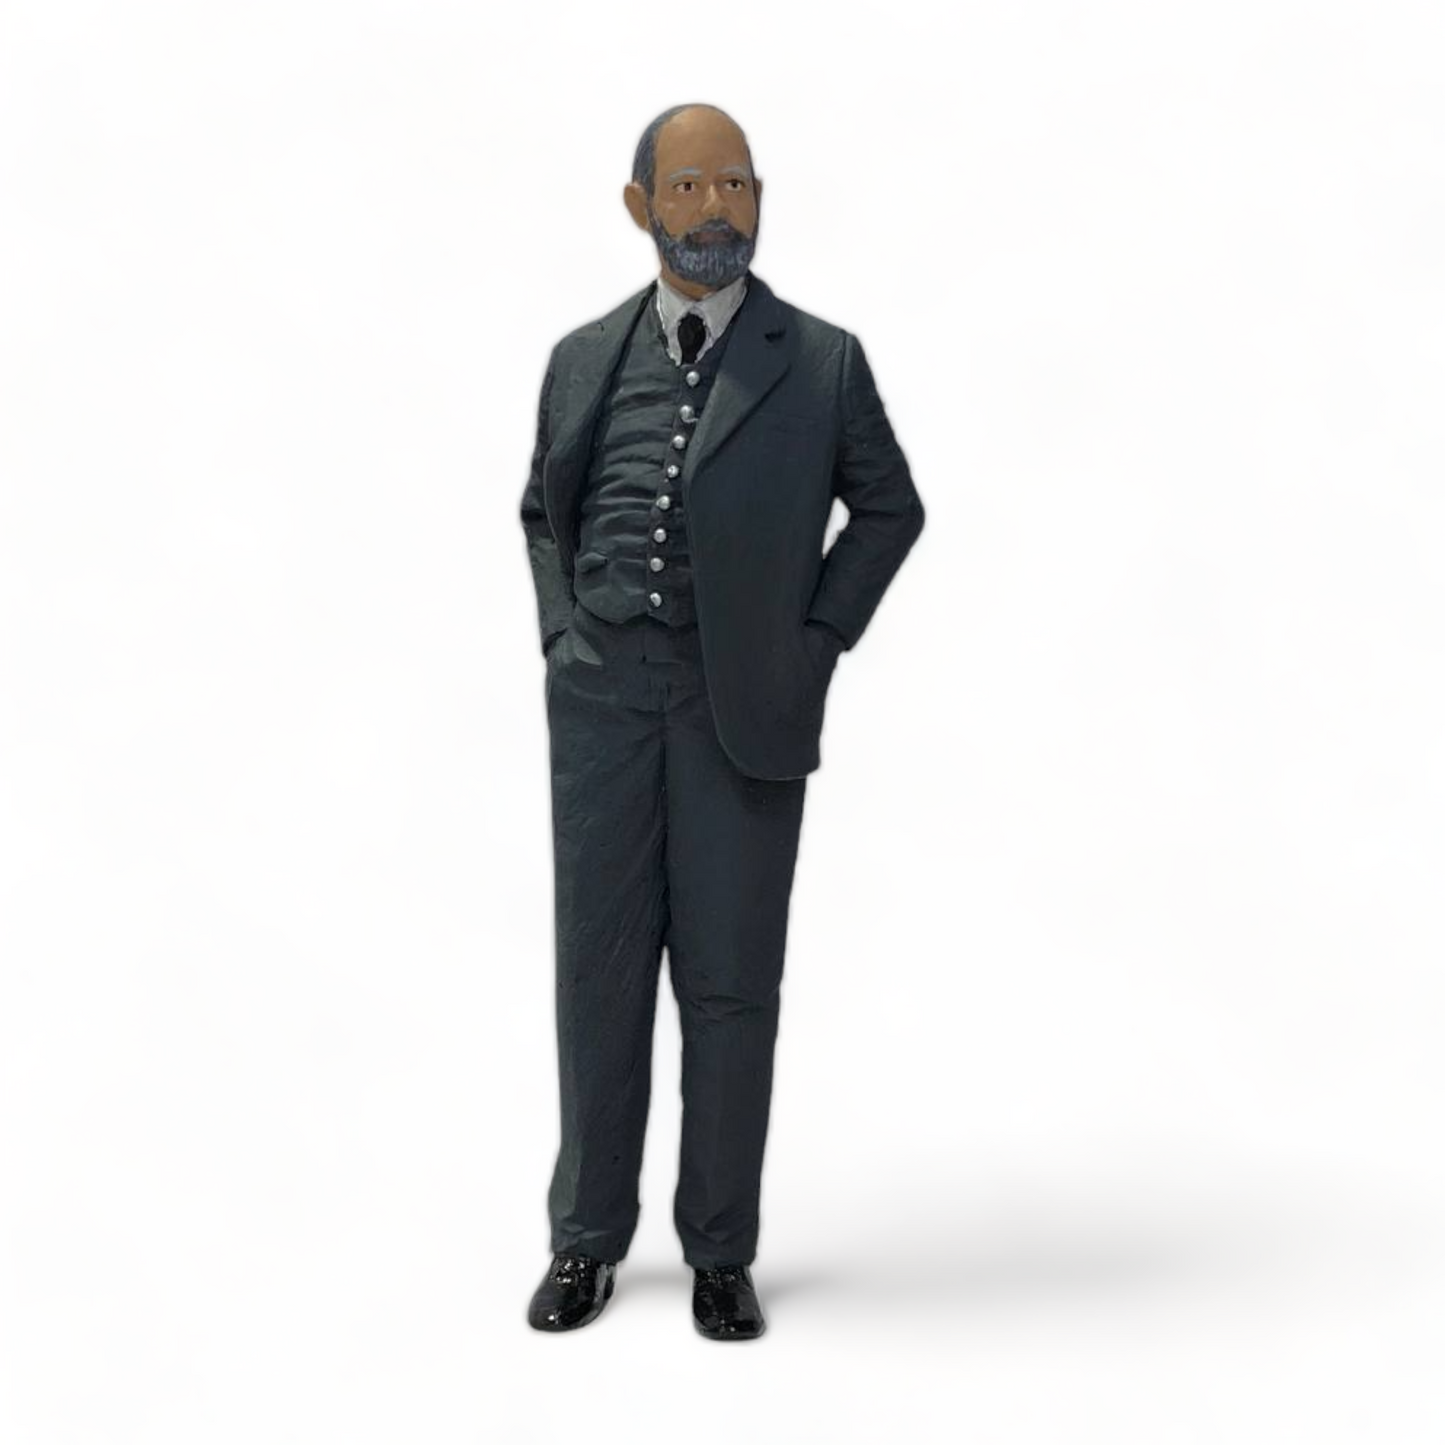 Figure "Charles Rolls and Henry Royce" by SF 1:18|Sold in Dturman.com Dubai UAE.